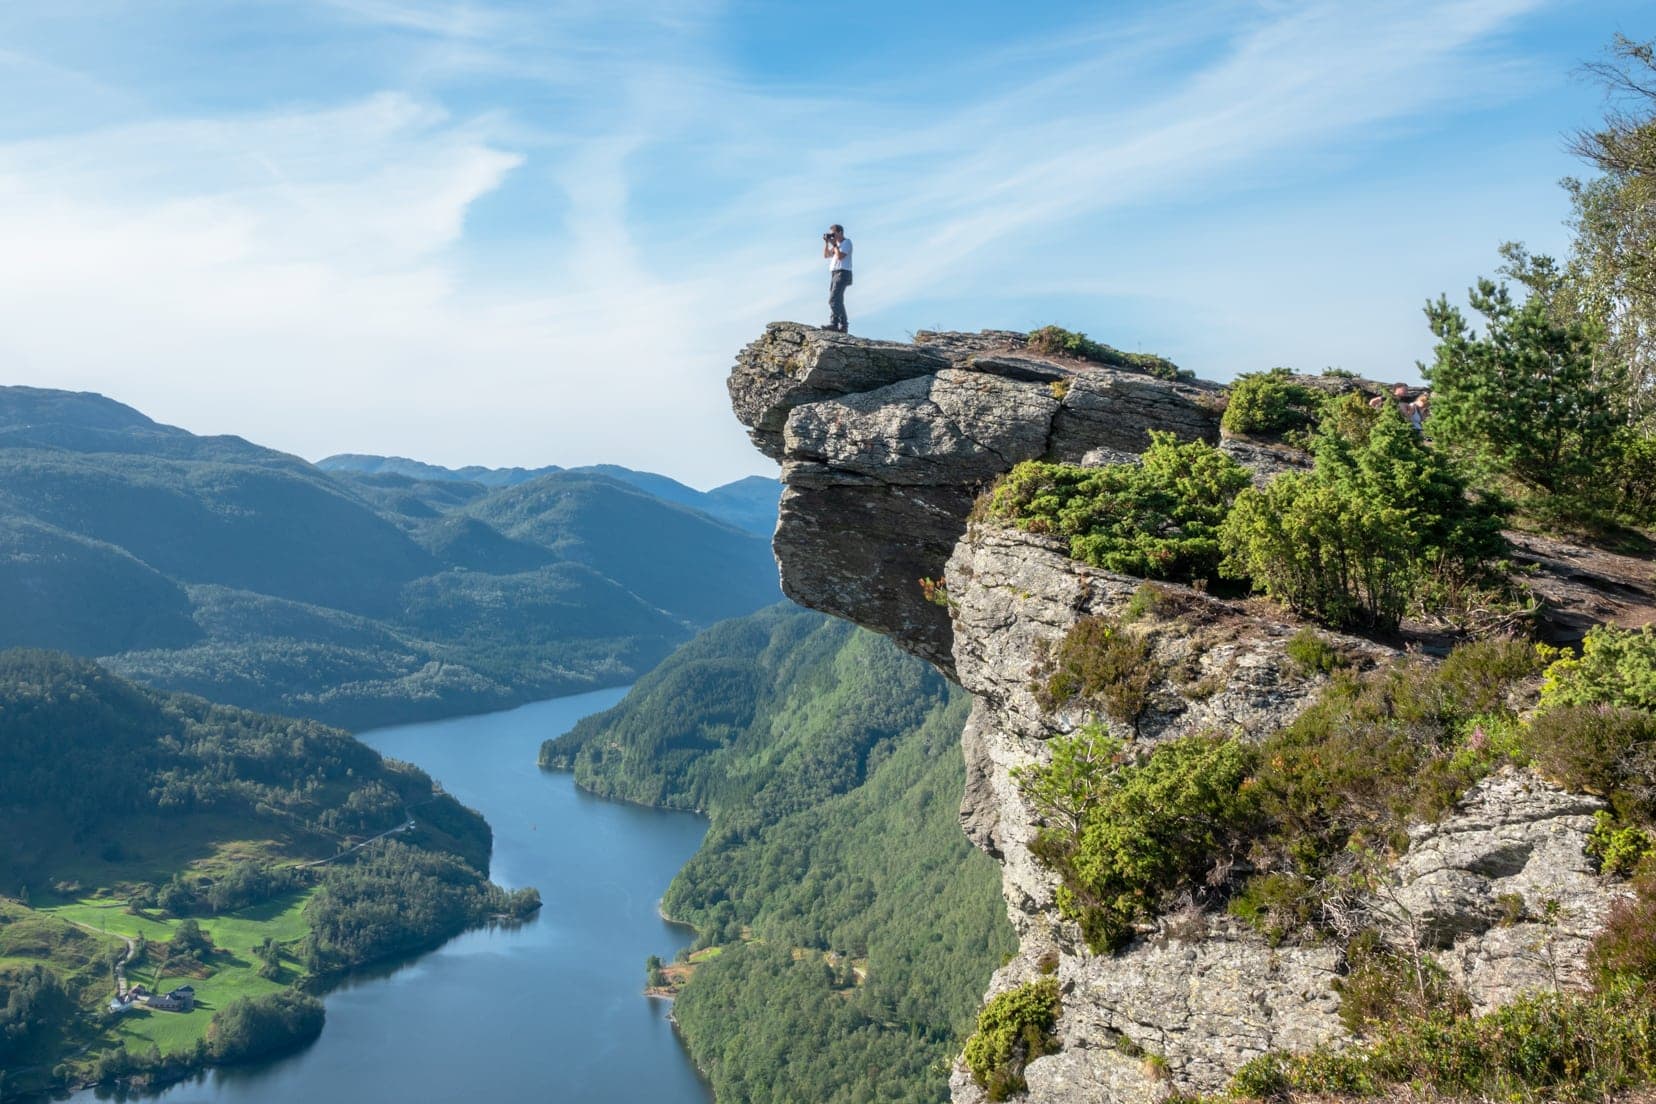 Man taking photograph from top of rocky outcrop with a fjord below